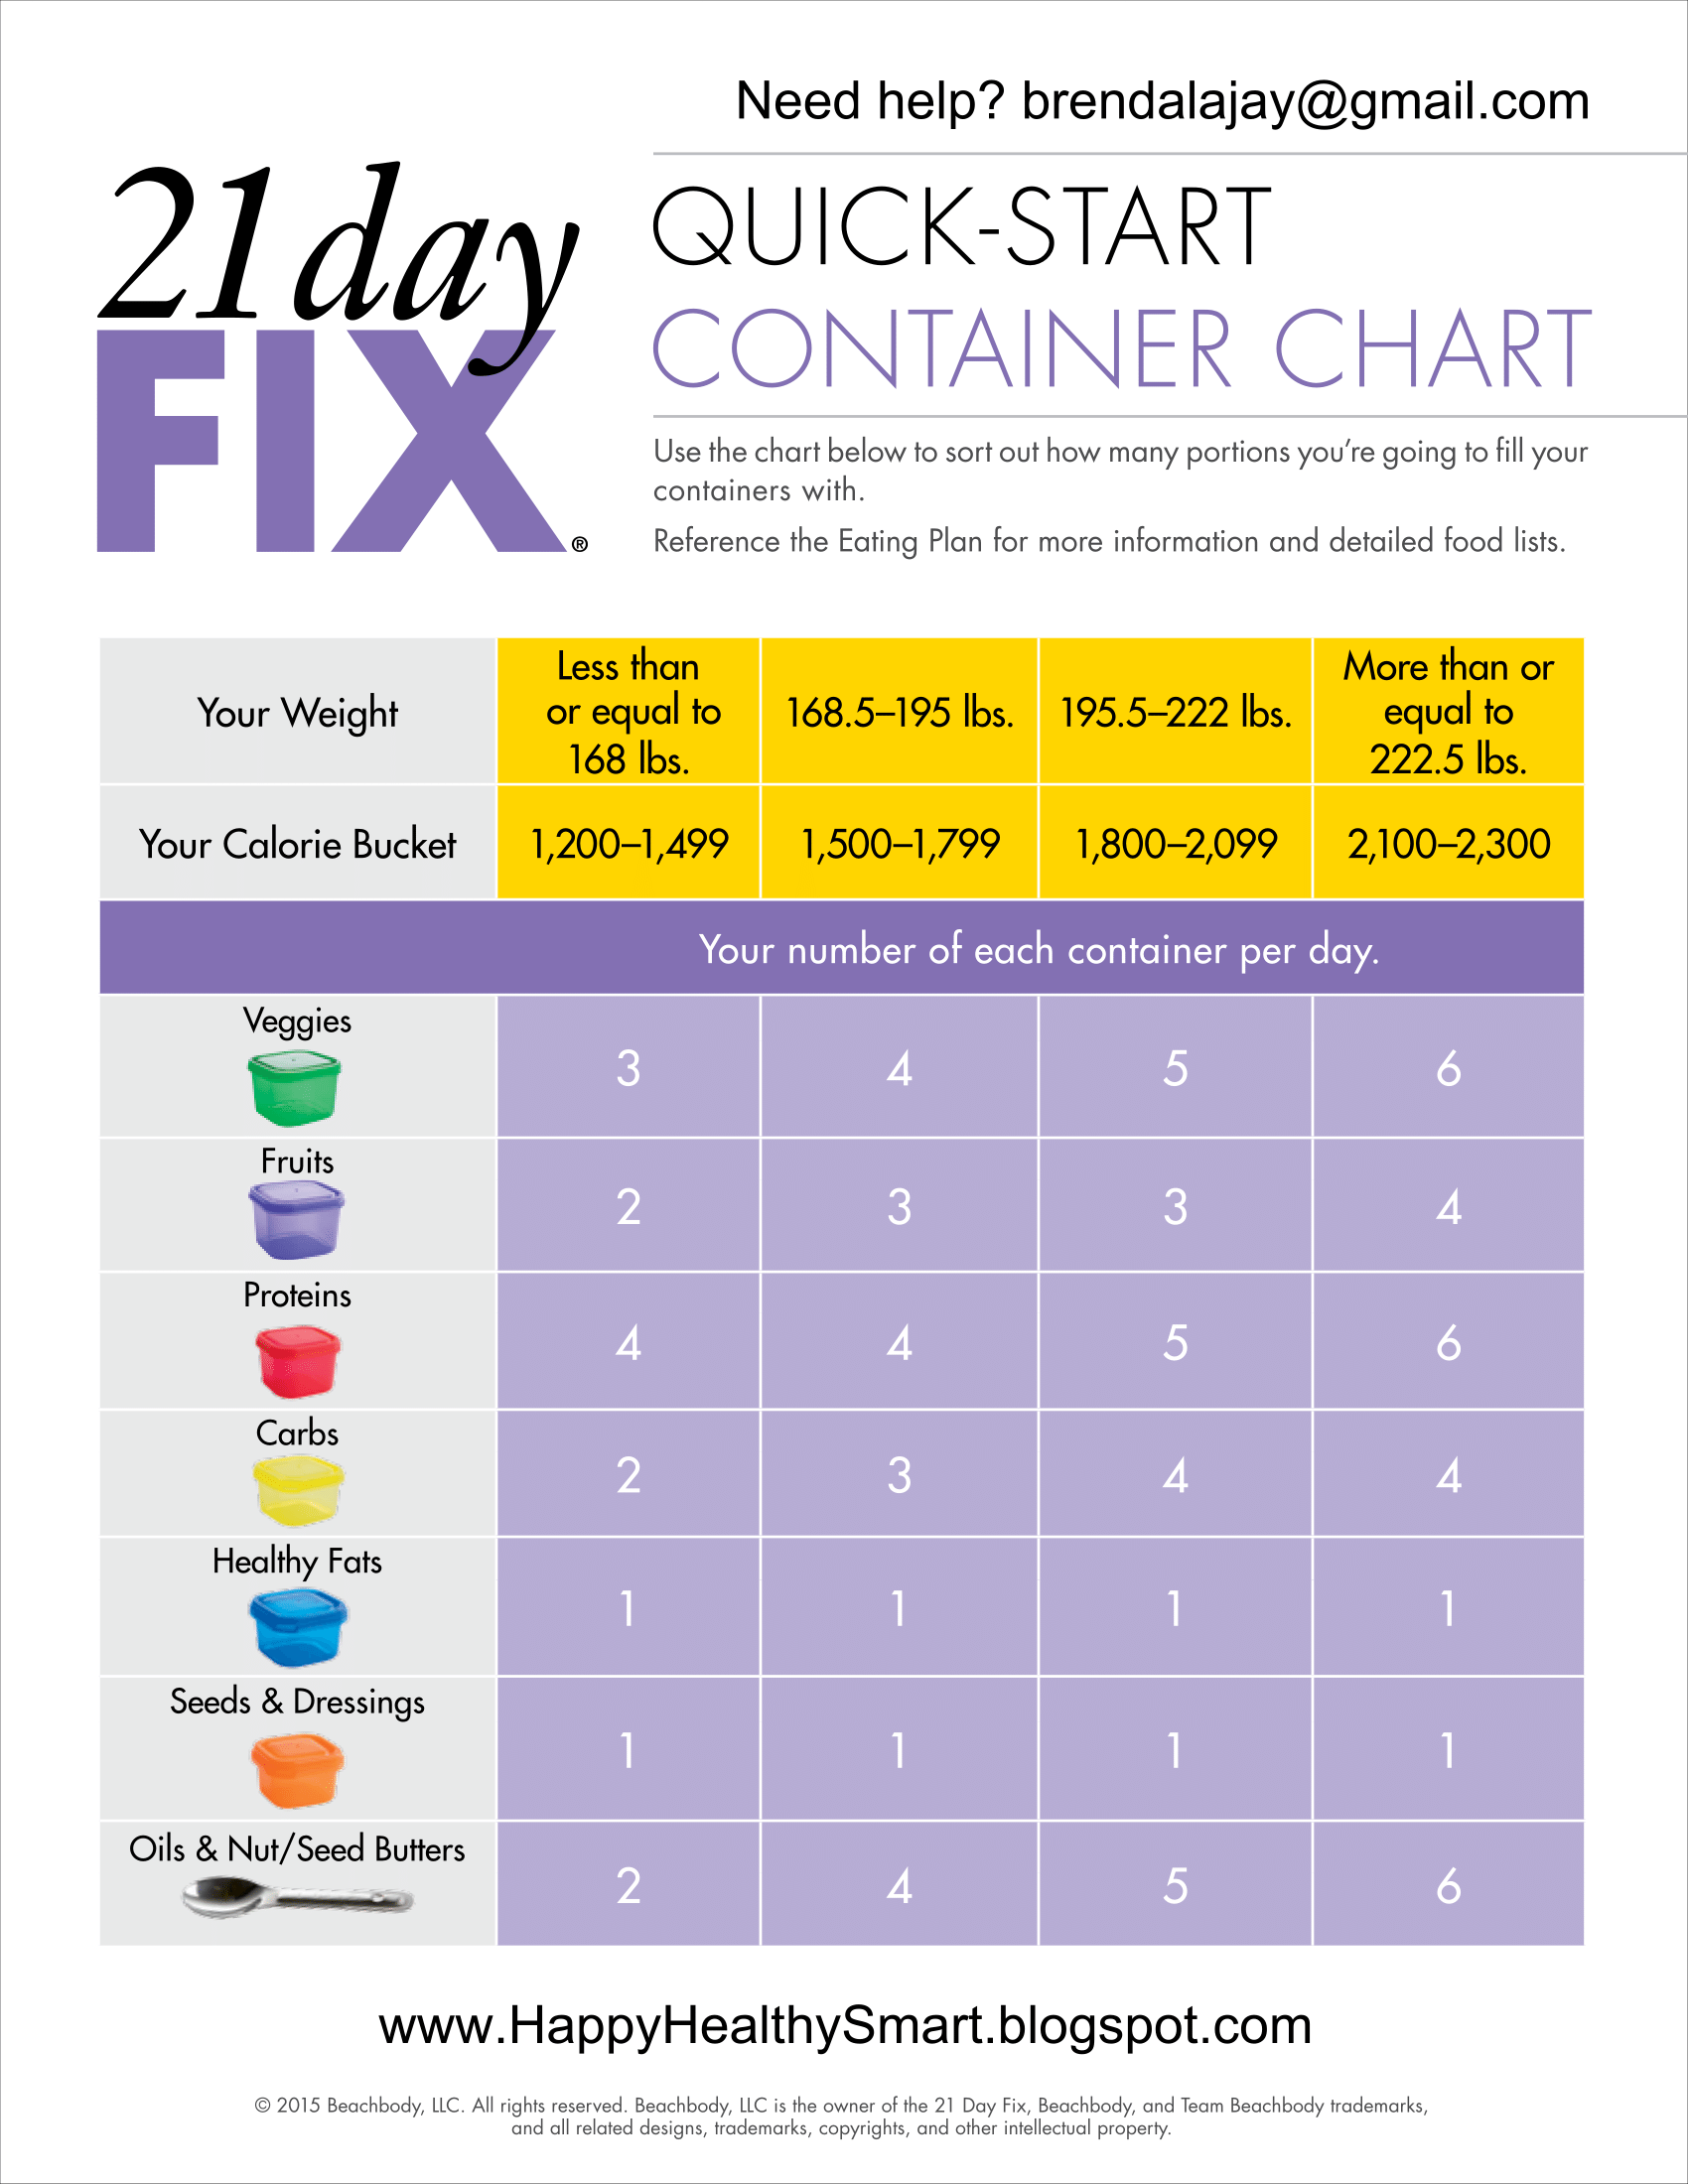 21-day-fix-meal-planning-made-easy-you-like-new